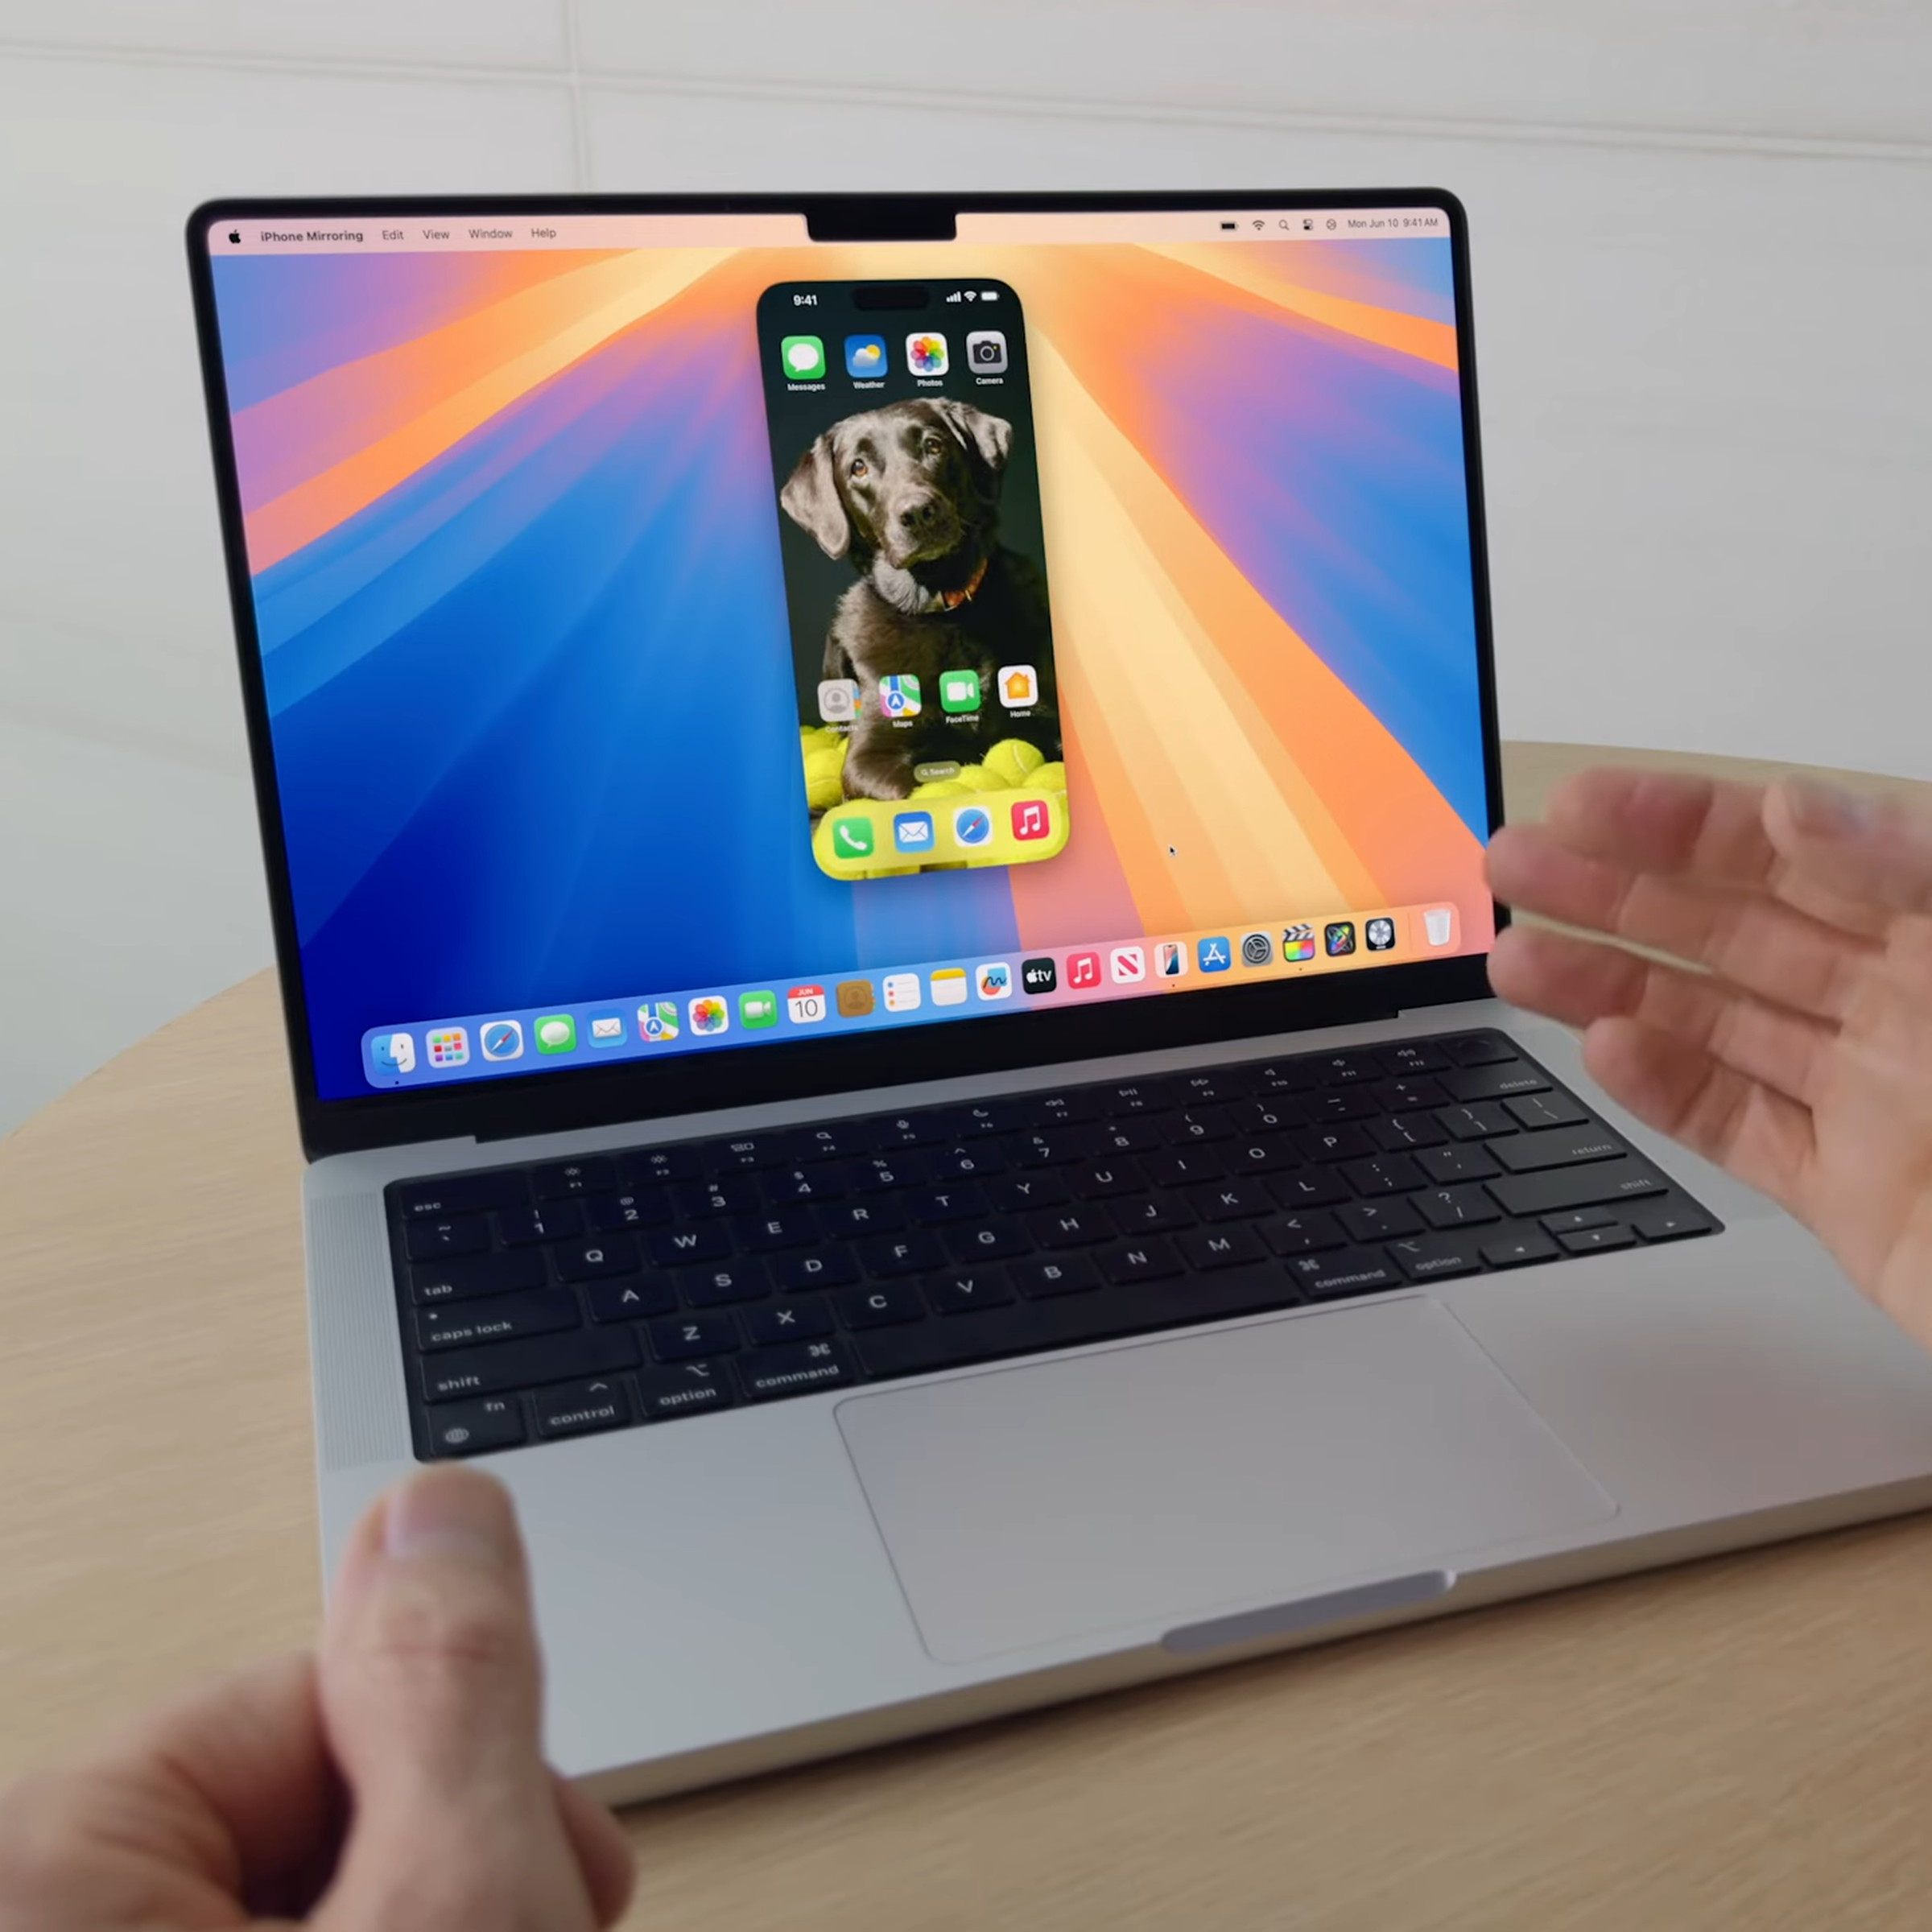 A MacBook Pro on a table shows a mirrored iPhone on its screen.